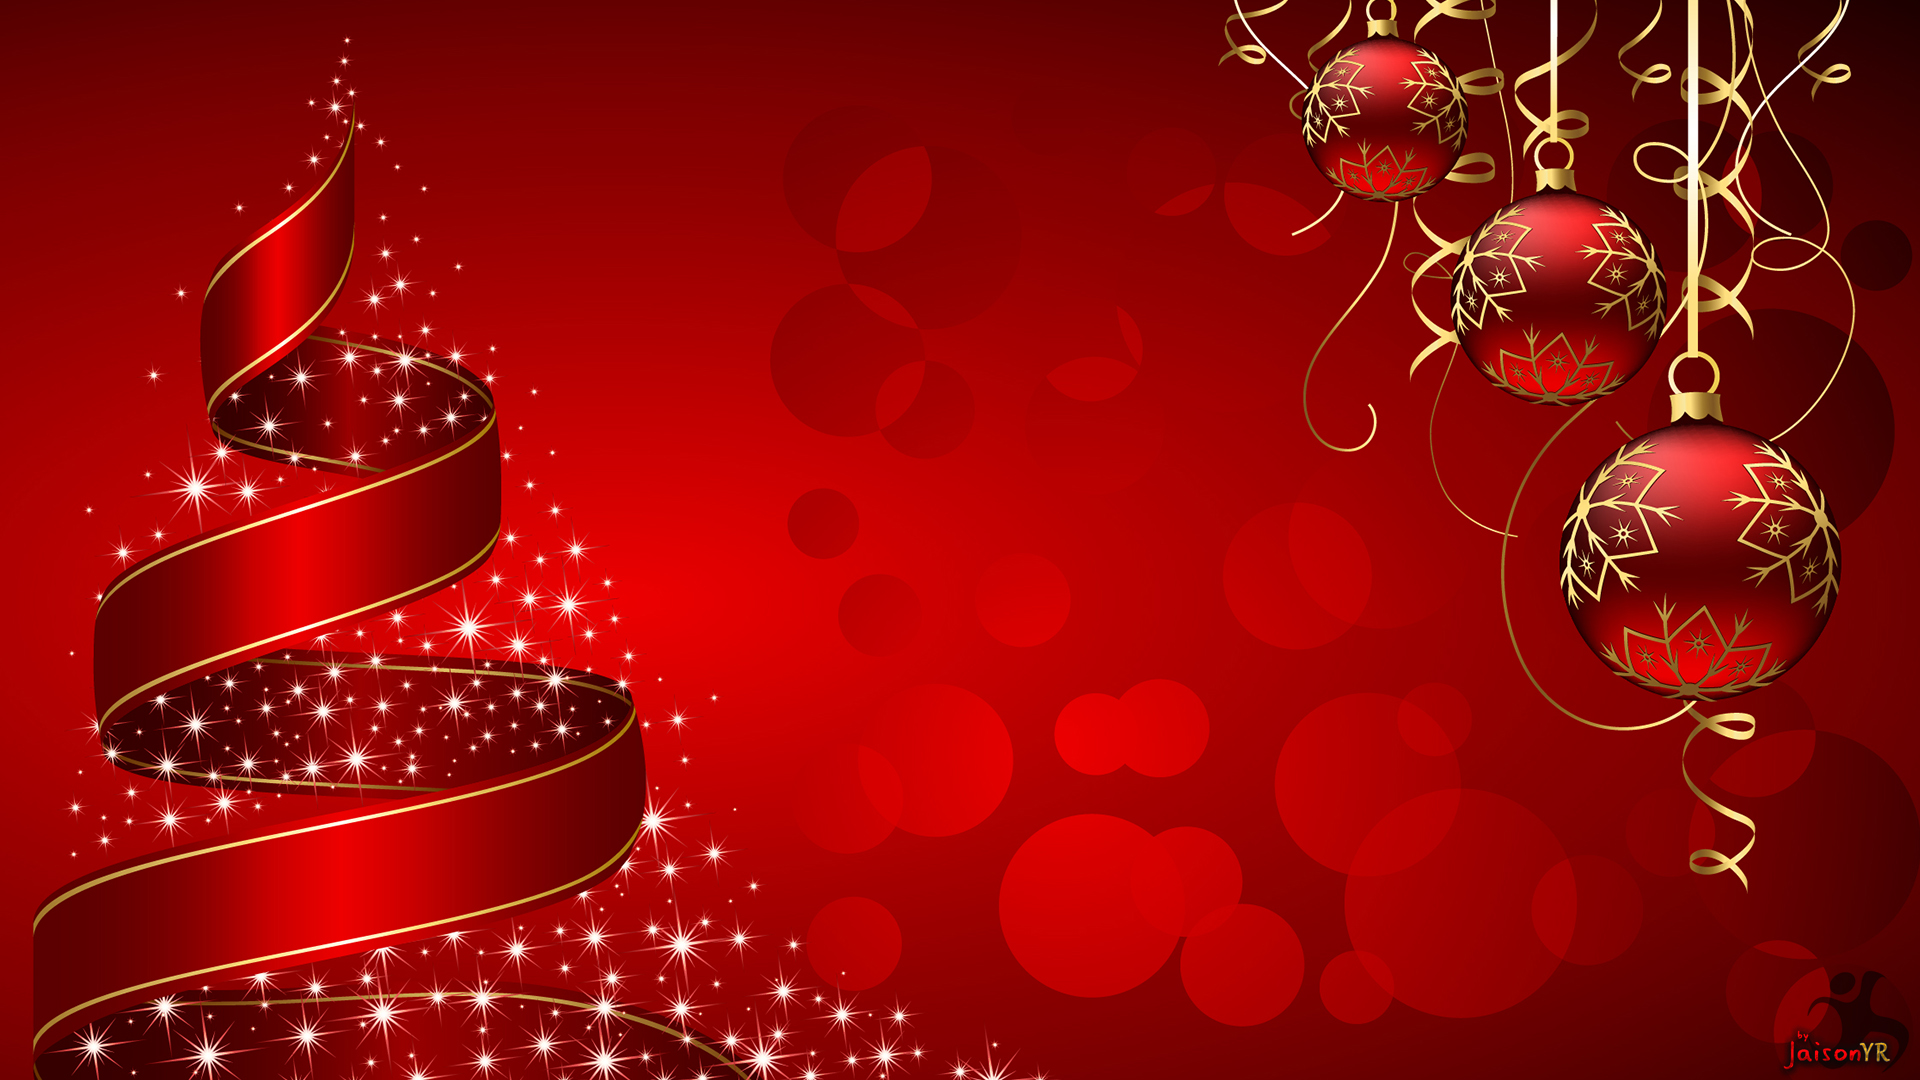 Red Christmas Backgrounds HD Wallpaper, Background Images